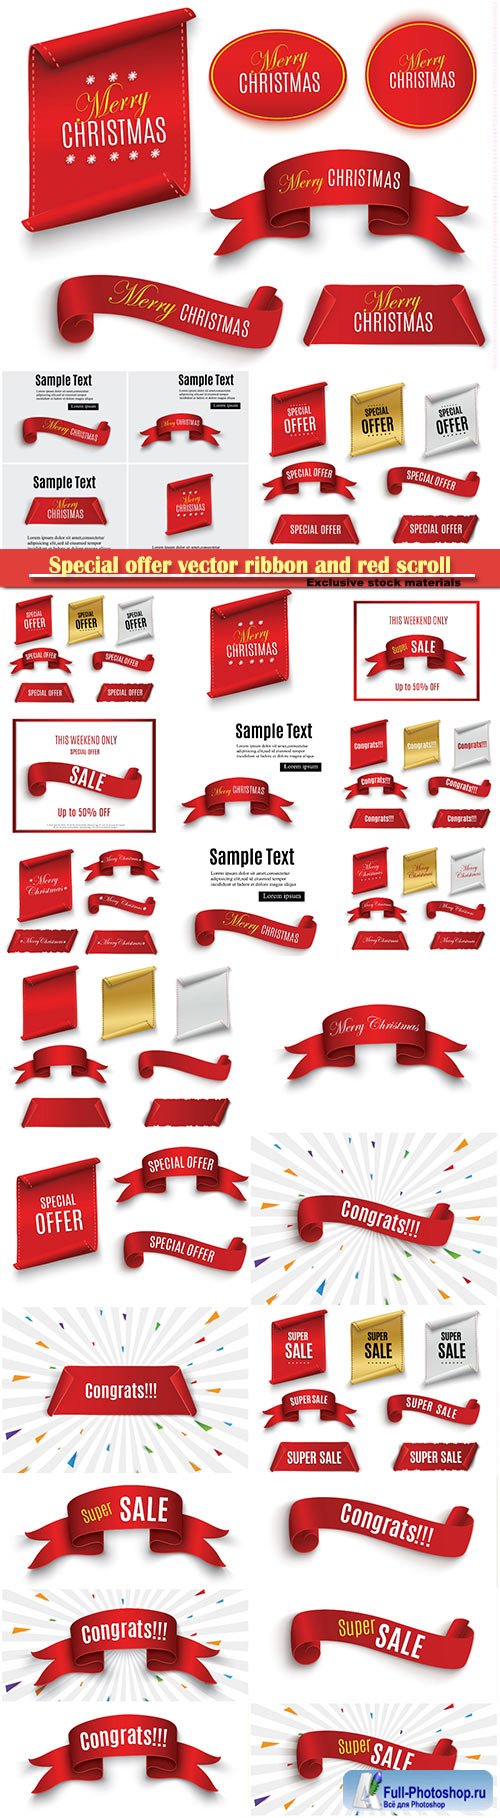 Special offer vector ribbon and red scroll, banner sale tag